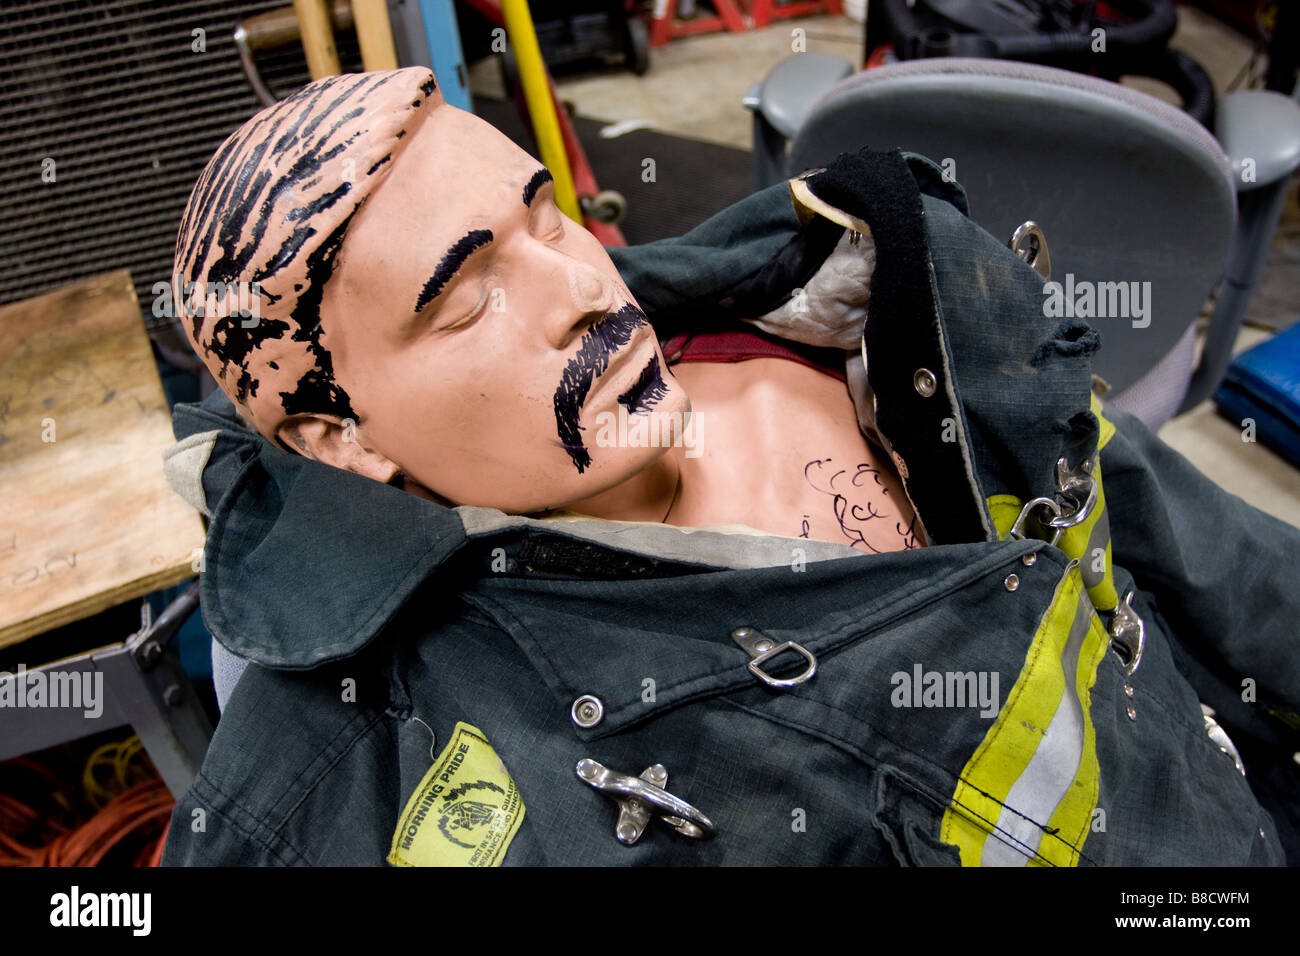 A firefighter training dummy with humorous mustache and hair drawn on wearing a protective fire suit Stock Photo